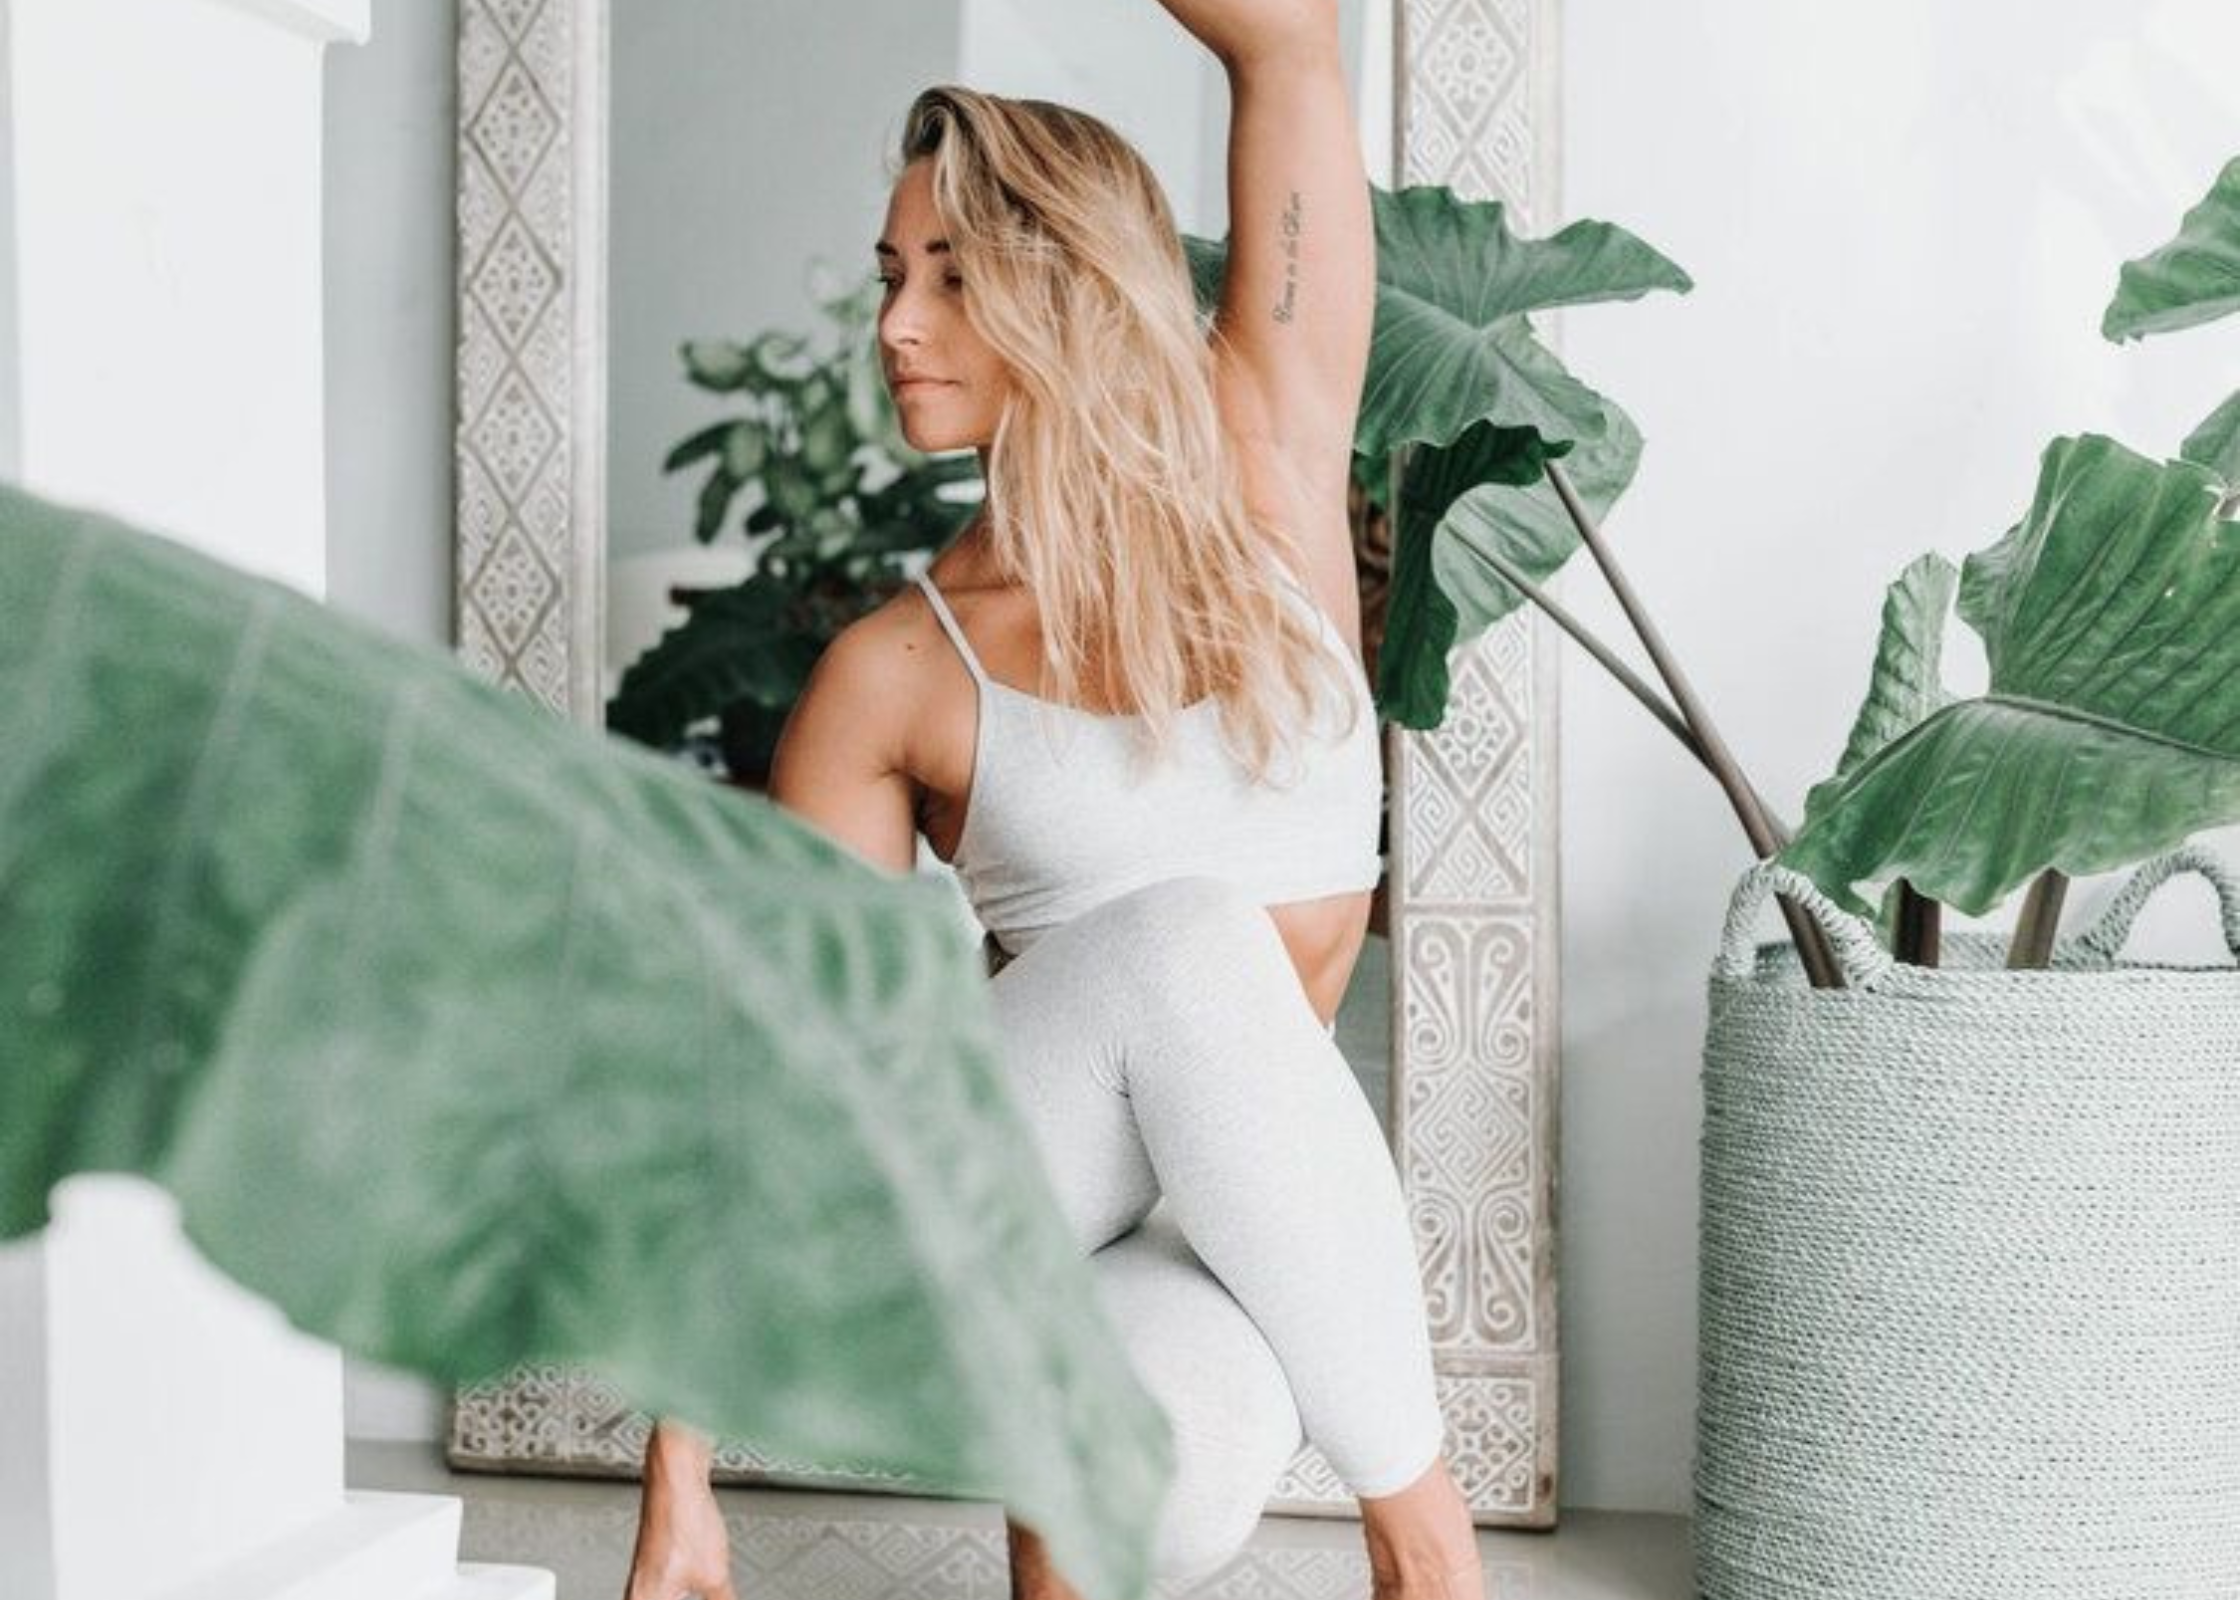 woman doing yoga and stretching. how to glow up. glow up tips. how to glow up in a week. How to glow up overnight. how to get a glow up. how to have a glow up. glow ups. how to be beautiful. fast and instant glowing up tips